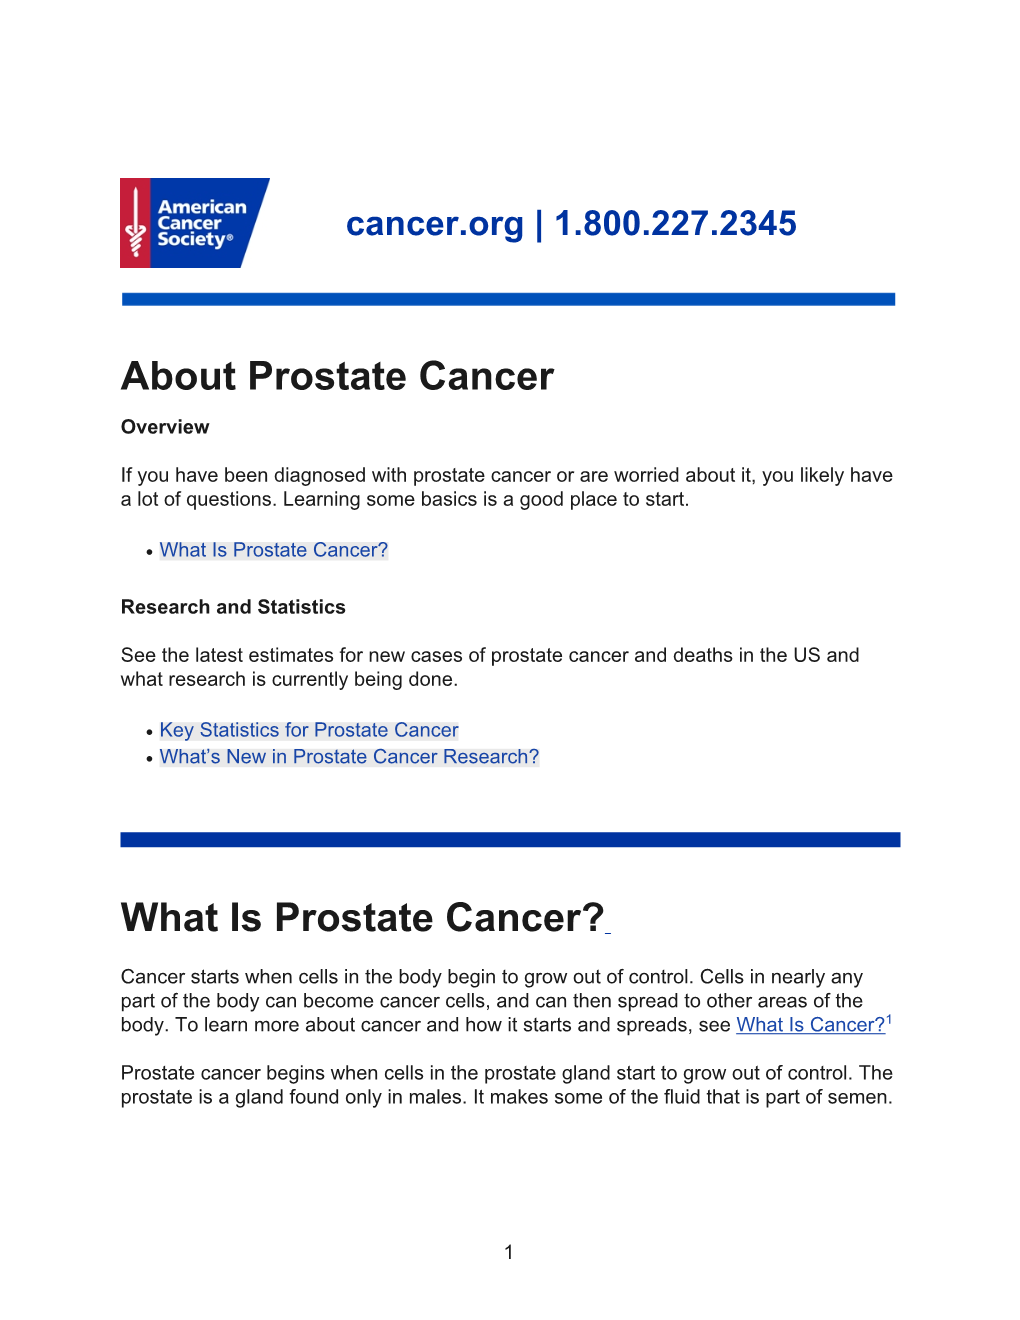 Prostate Cancer Overview